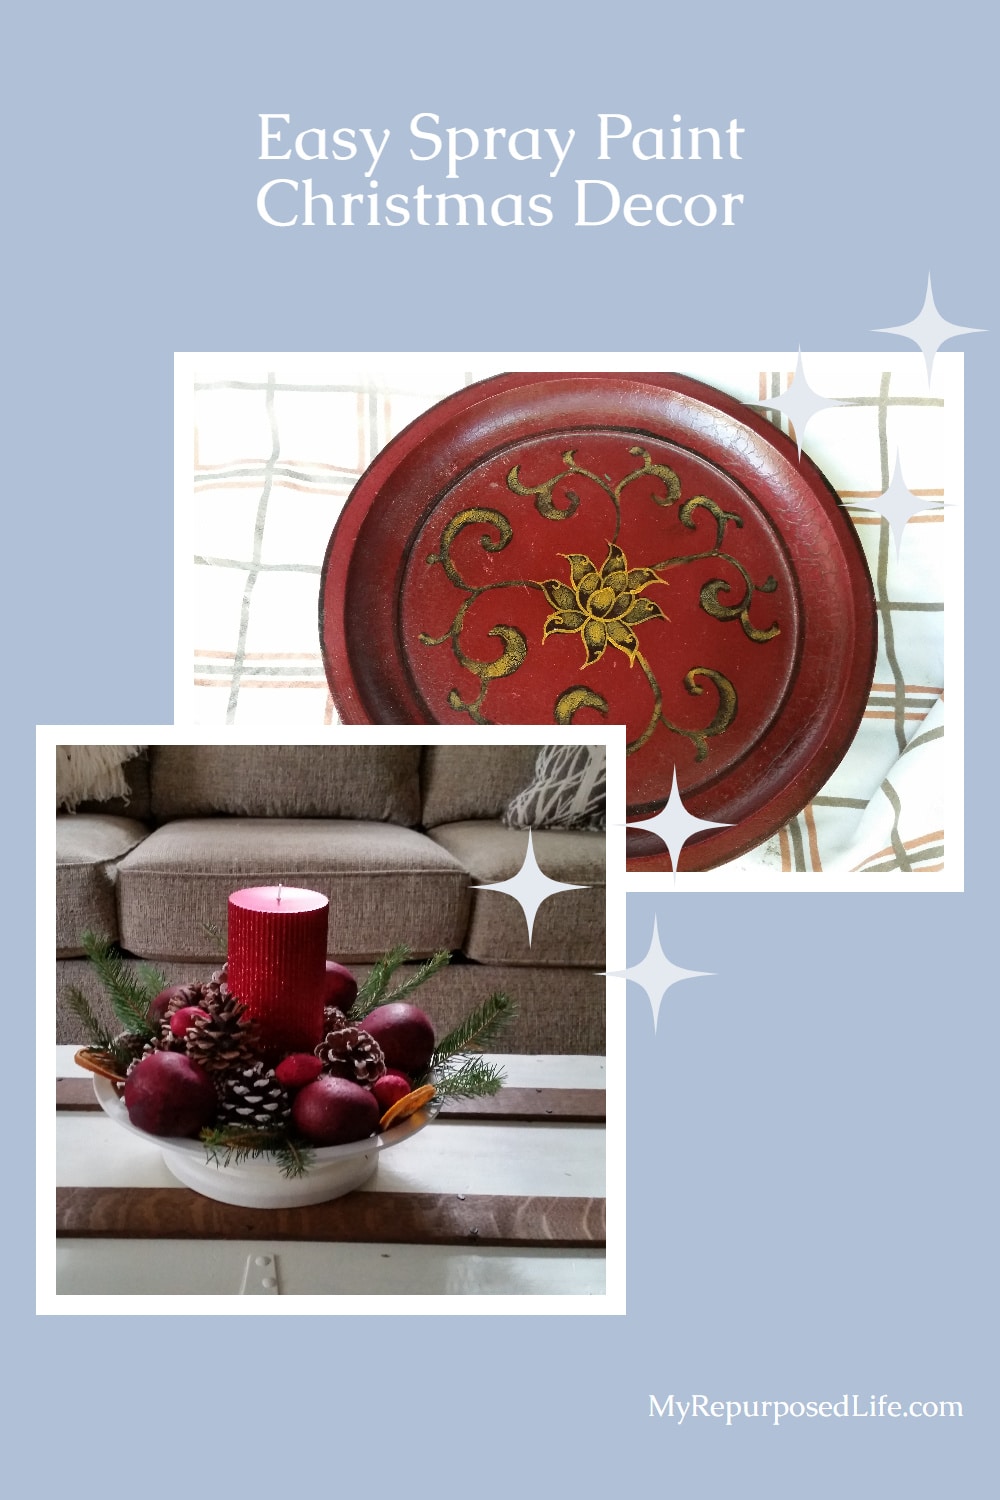 How to change up a thrift store platter with spray paint into a pretty new Christmas decor project. #MyRepurposedLife #upcycle #Christmasdecor #Christmas via @repurposedlife